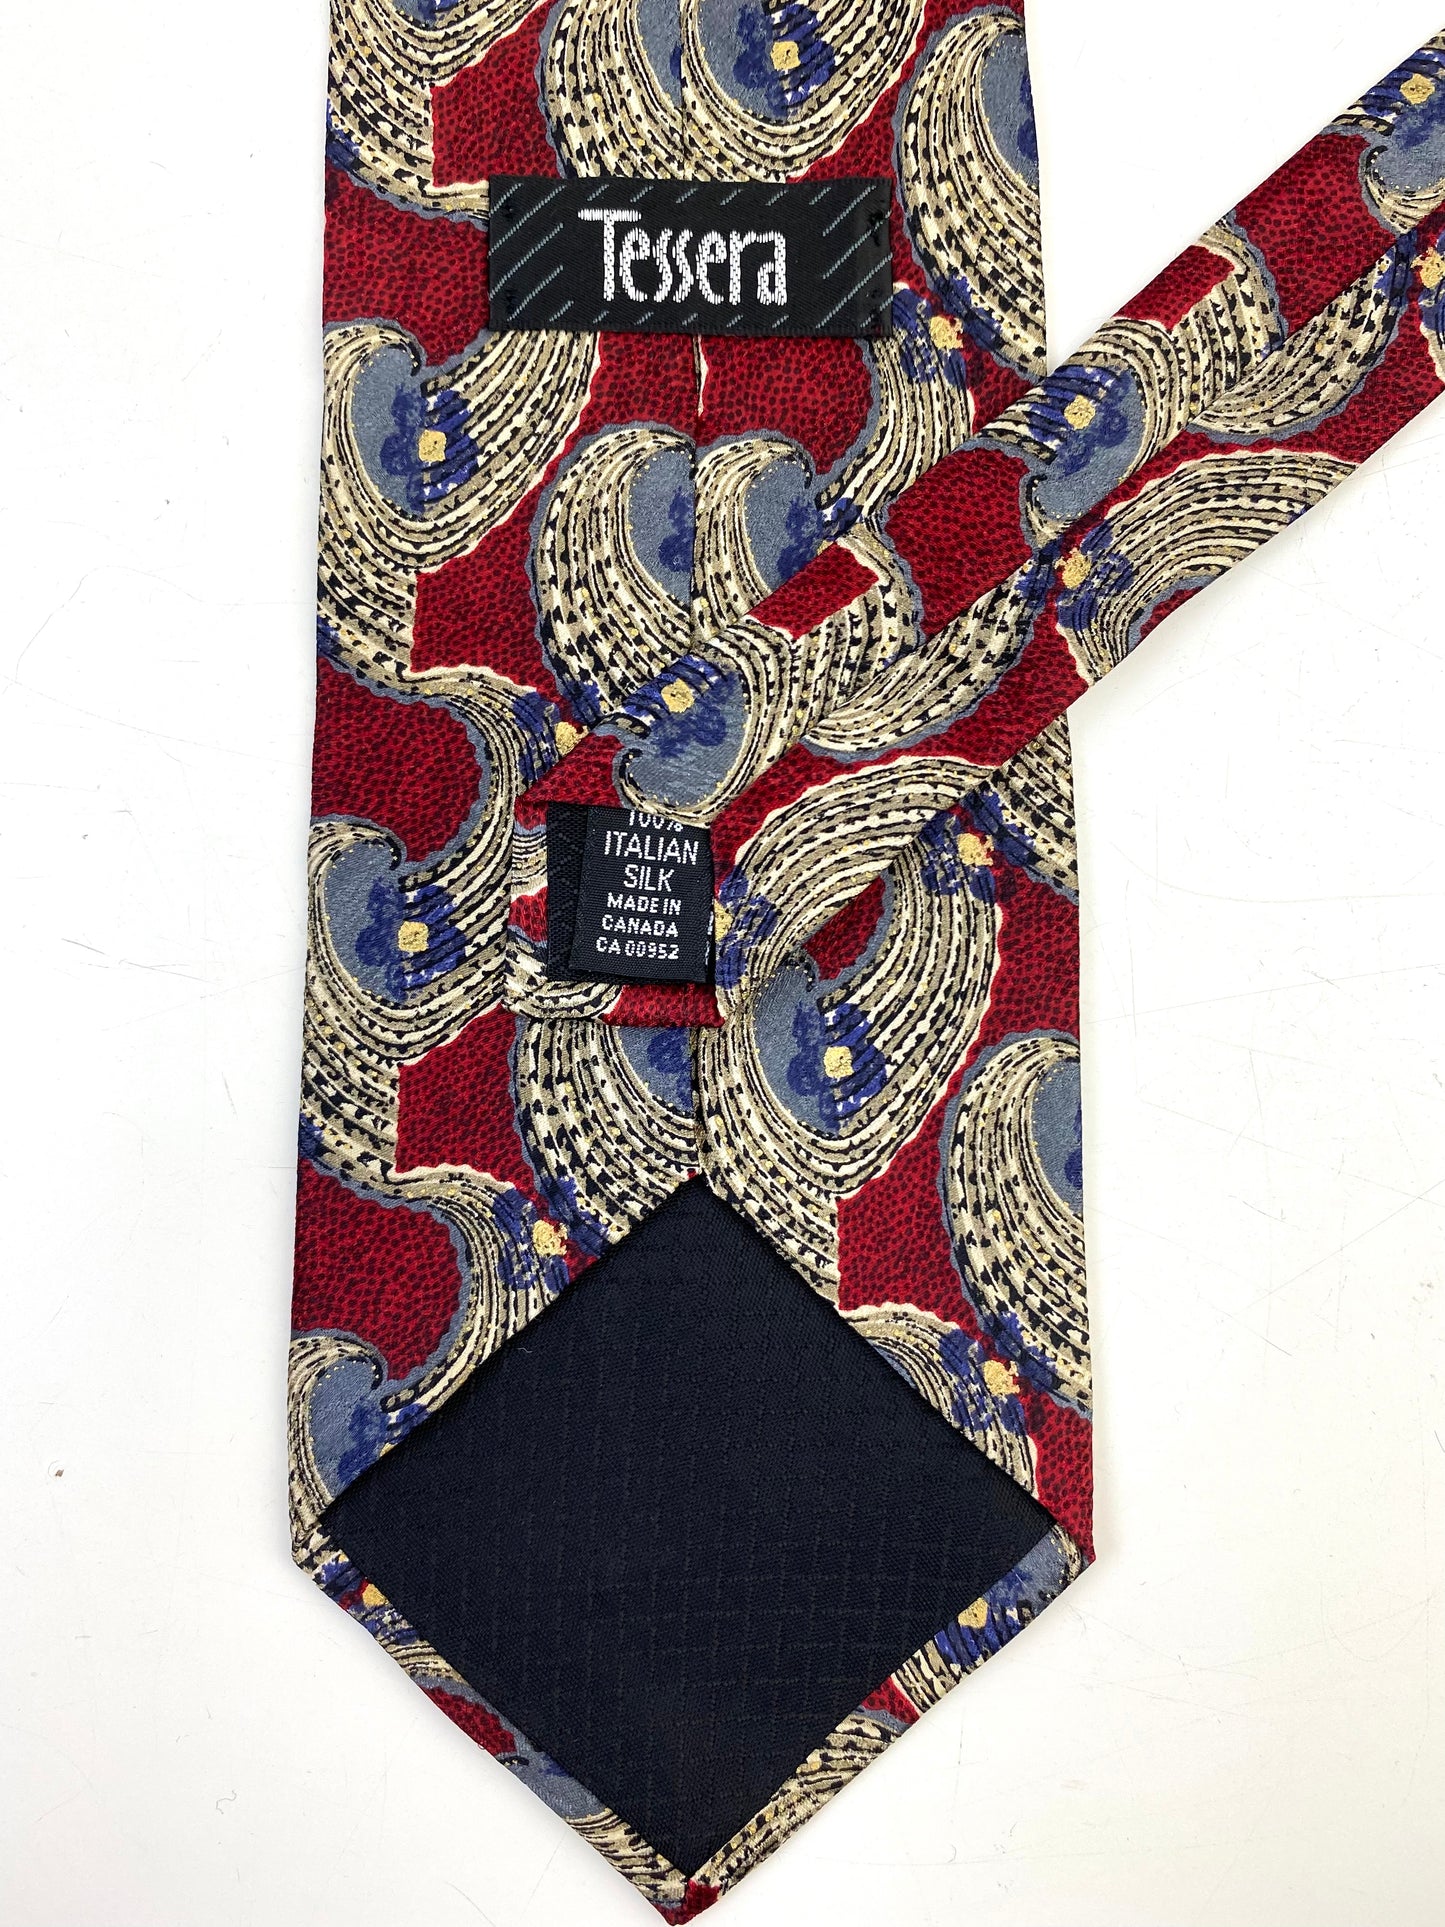 Back and labels of: 90s Deadstock Silk Necktie, Men's Vintage Wine/ Blue Abstract Floral Pattern Tie, NOS